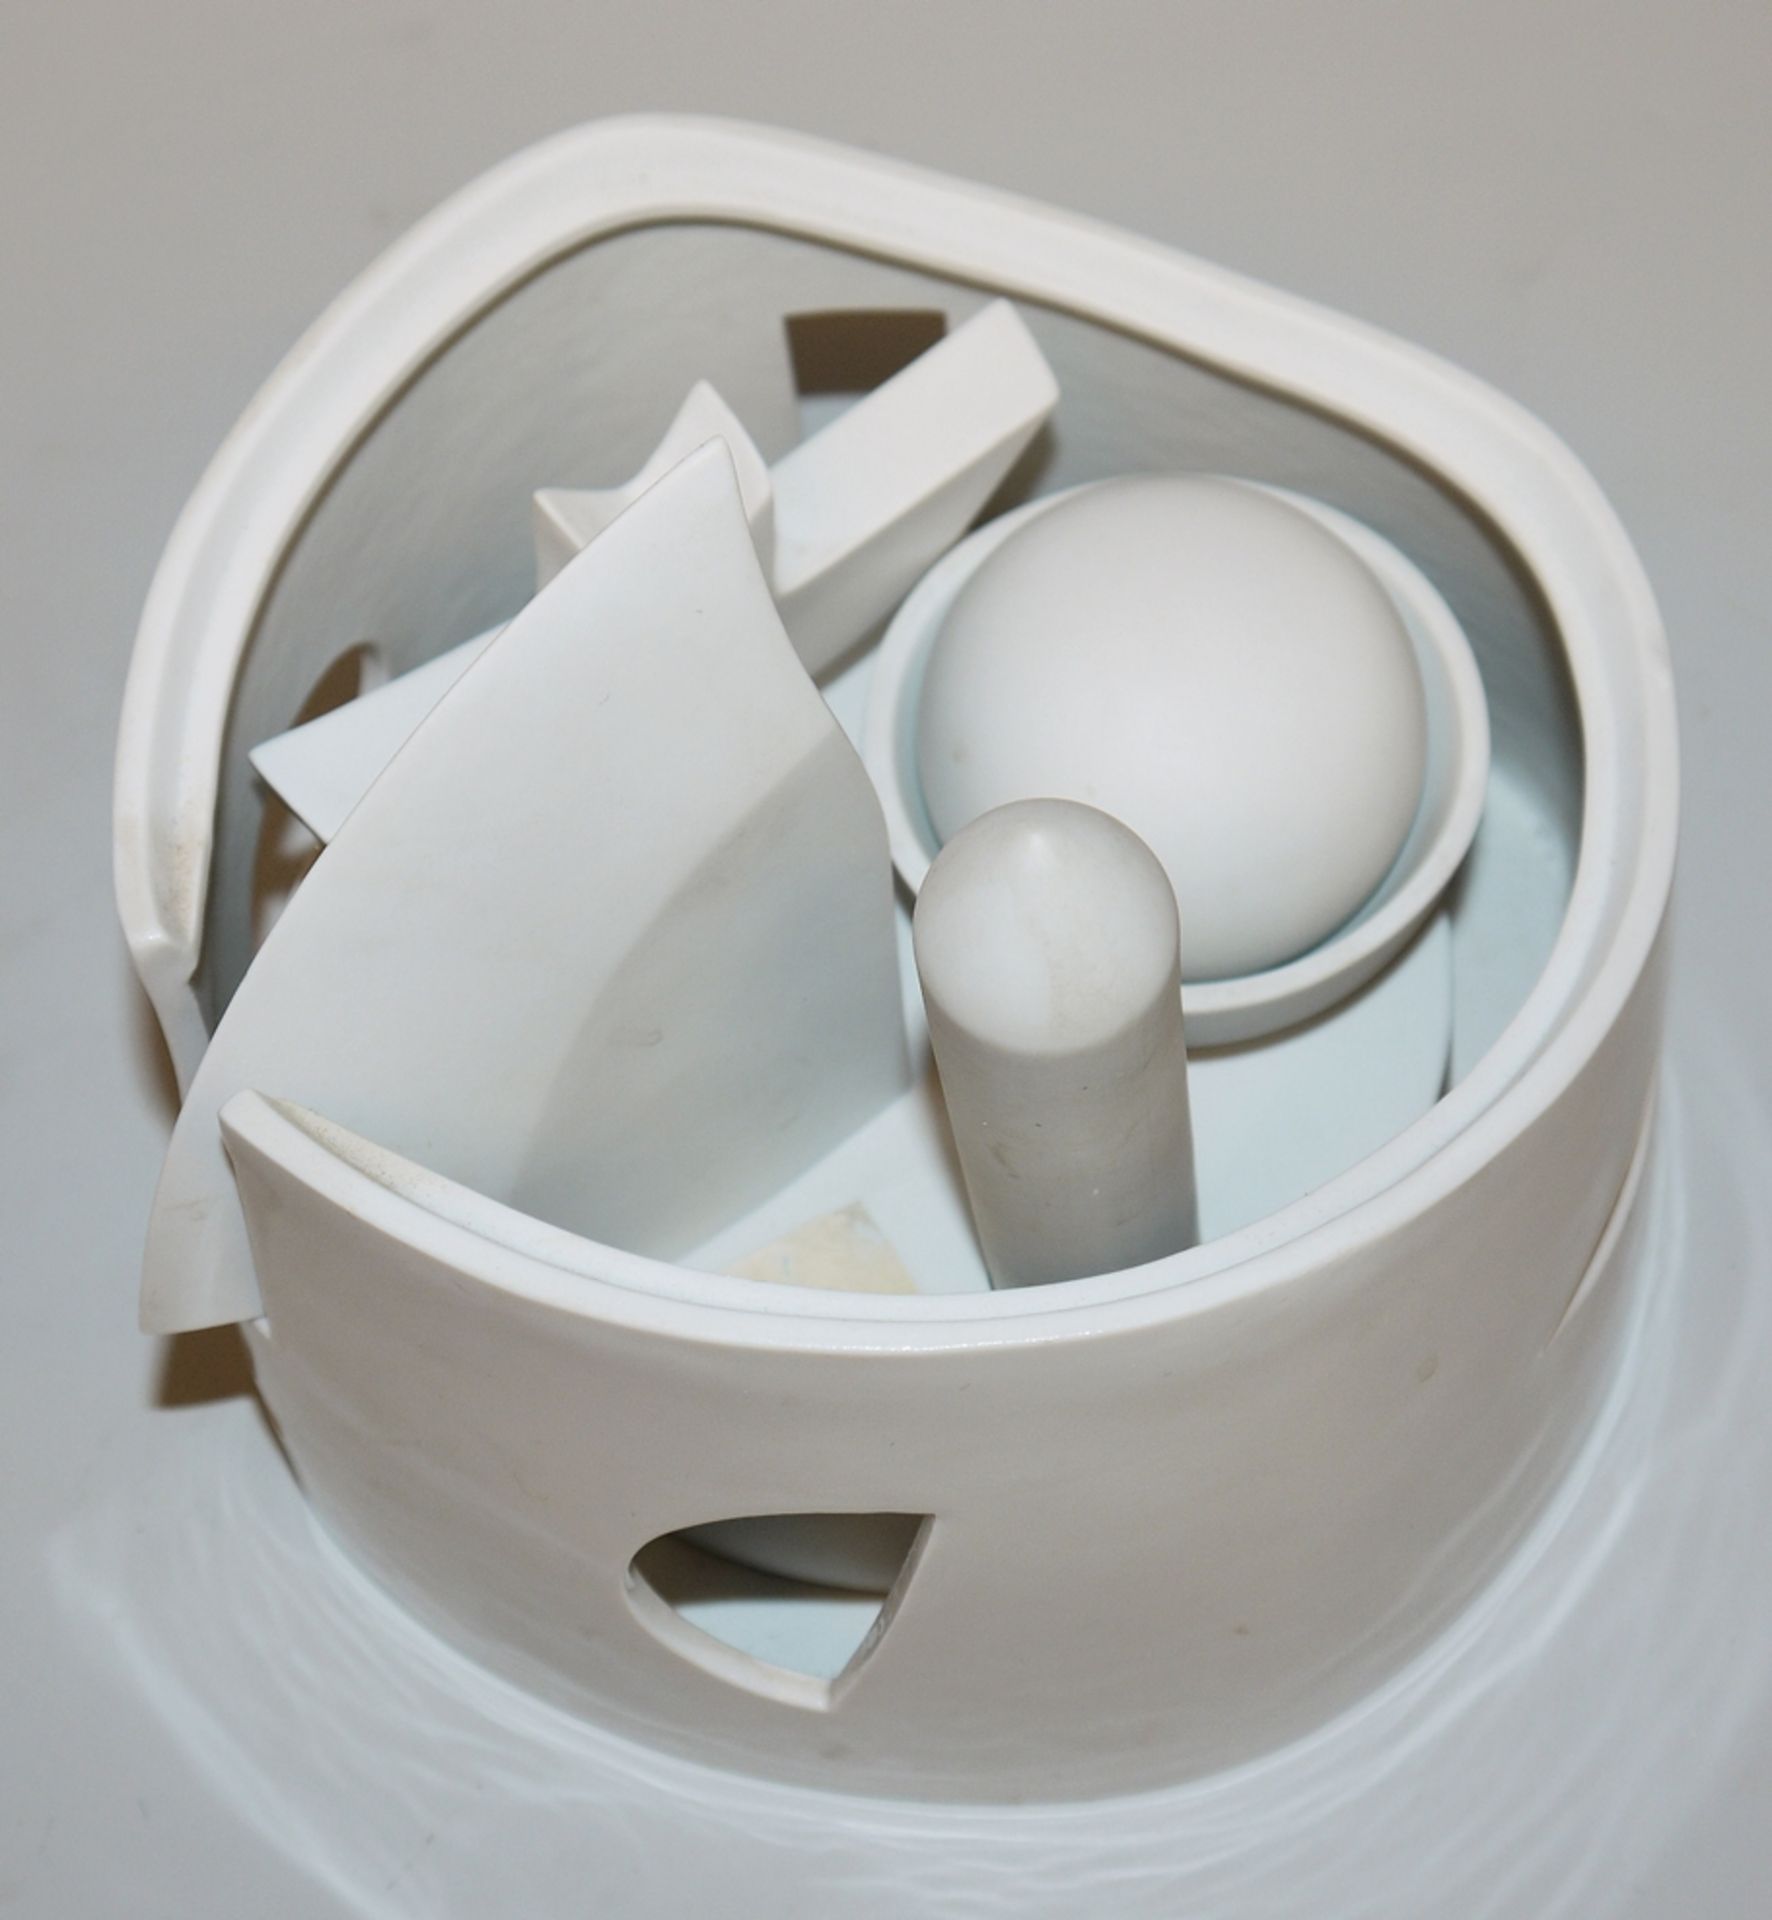 Wolfgang Bier, porcelain sculpture "Helmet with Interior" from 1988 for Goebel, Oeslau, signed - Image 2 of 2